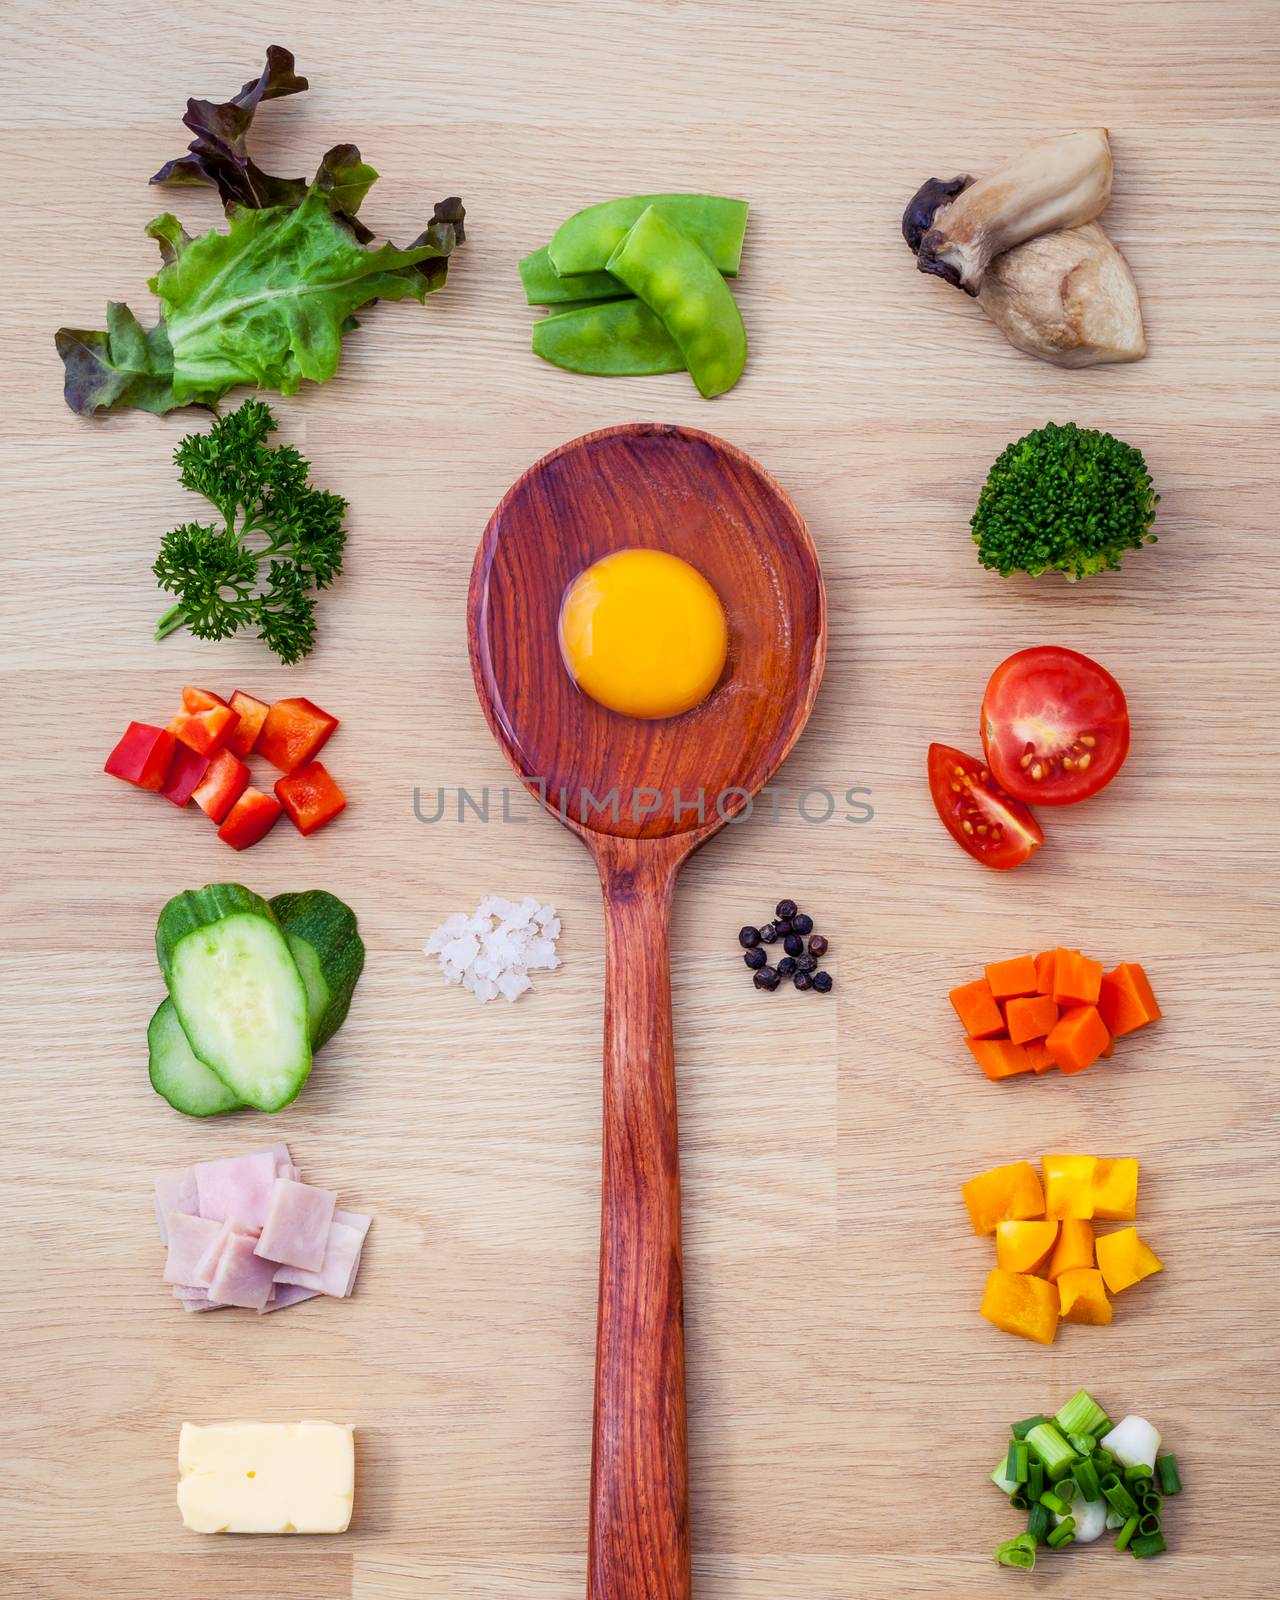 Ingredients of homemade omelet on wooden panel.Various vegetable and seasoning for cooking breakfast. Food background concept flat lay on wooden table.